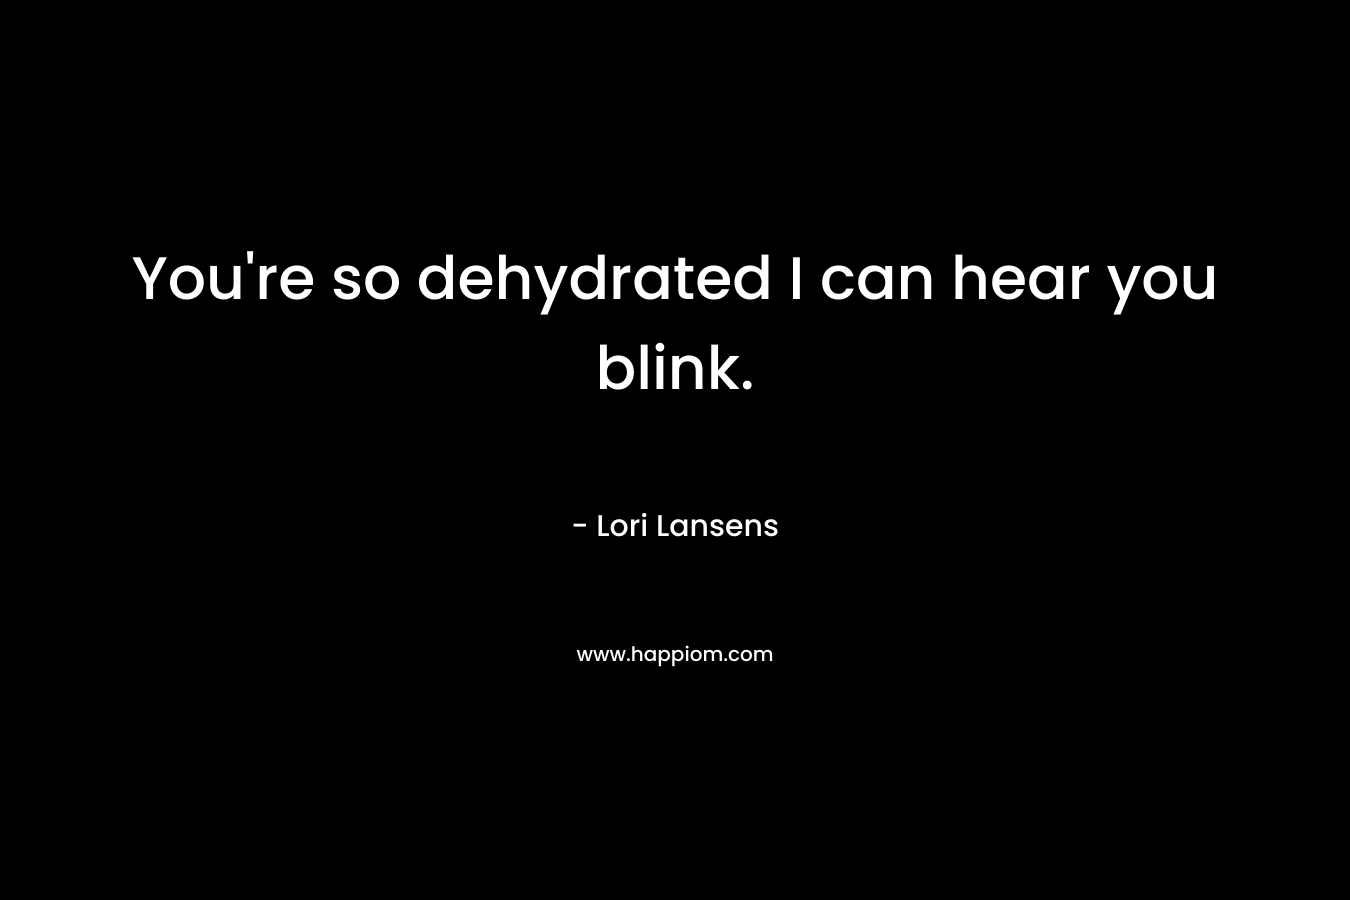 You’re so dehydrated I can hear you blink. – Lori Lansens